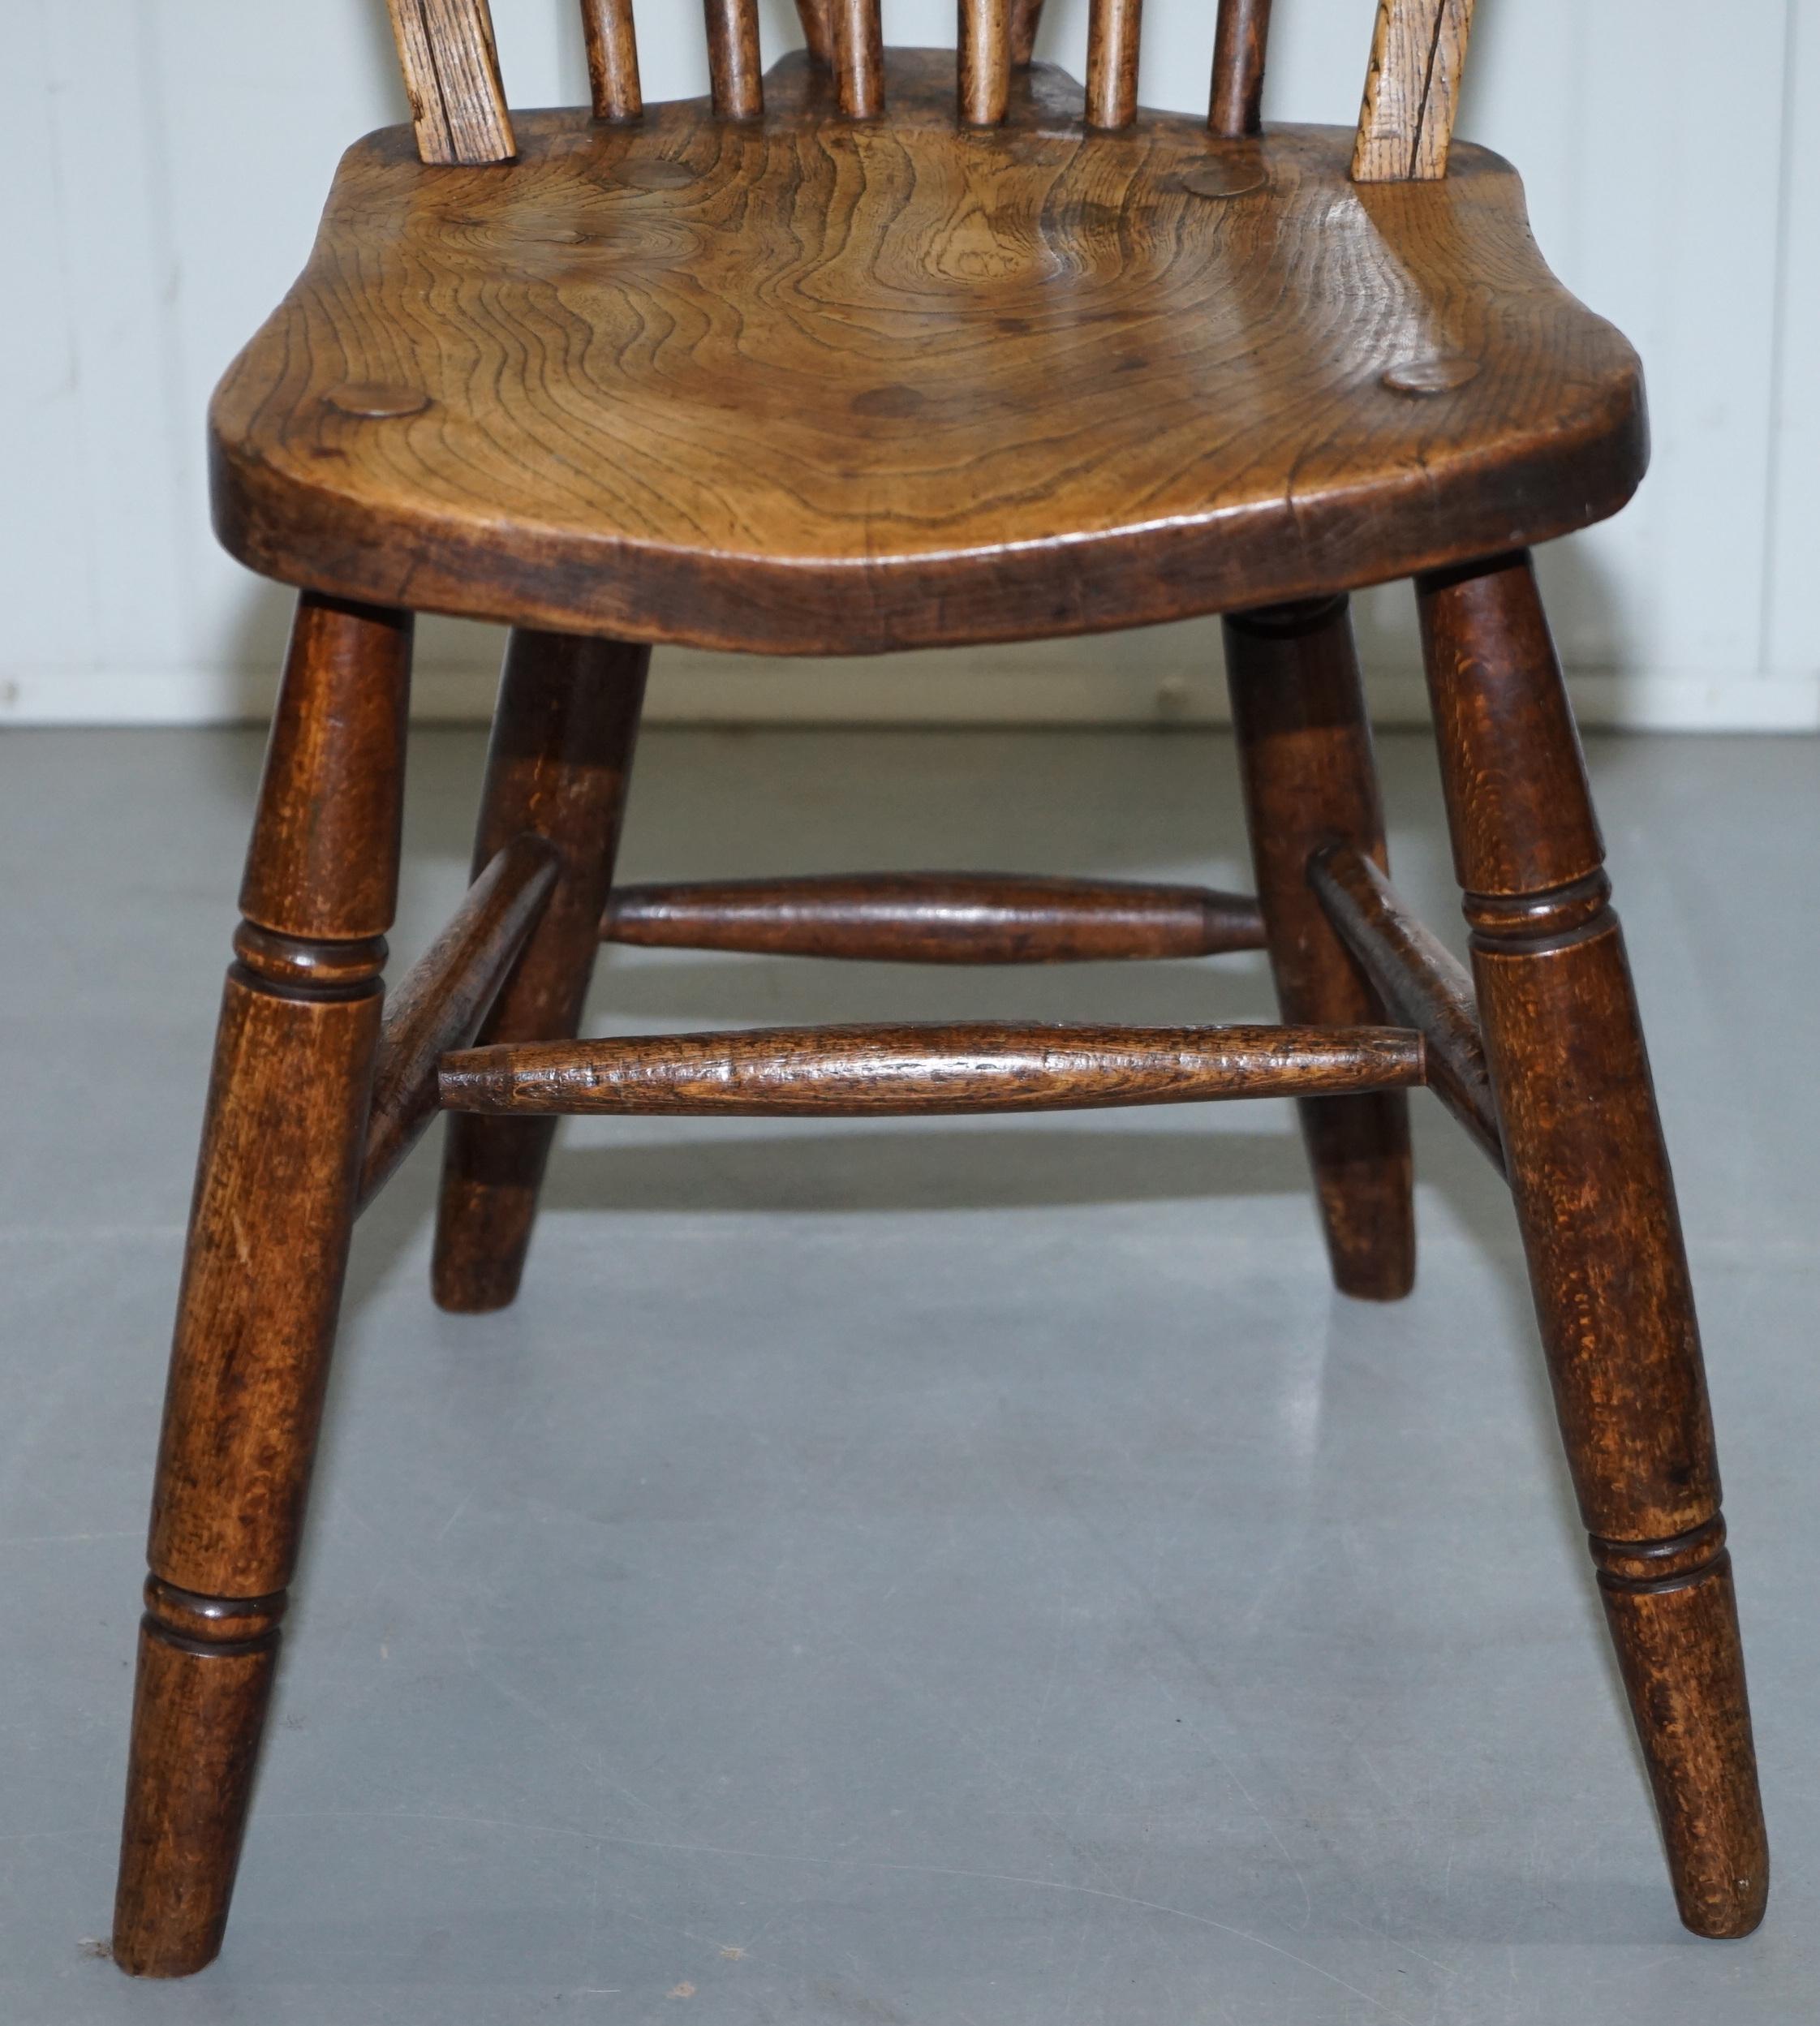 Mid-19th Century Rare Pair of Fully Stamped Victorian 1840 Hoop Back Windsor Chairs High Wycombe